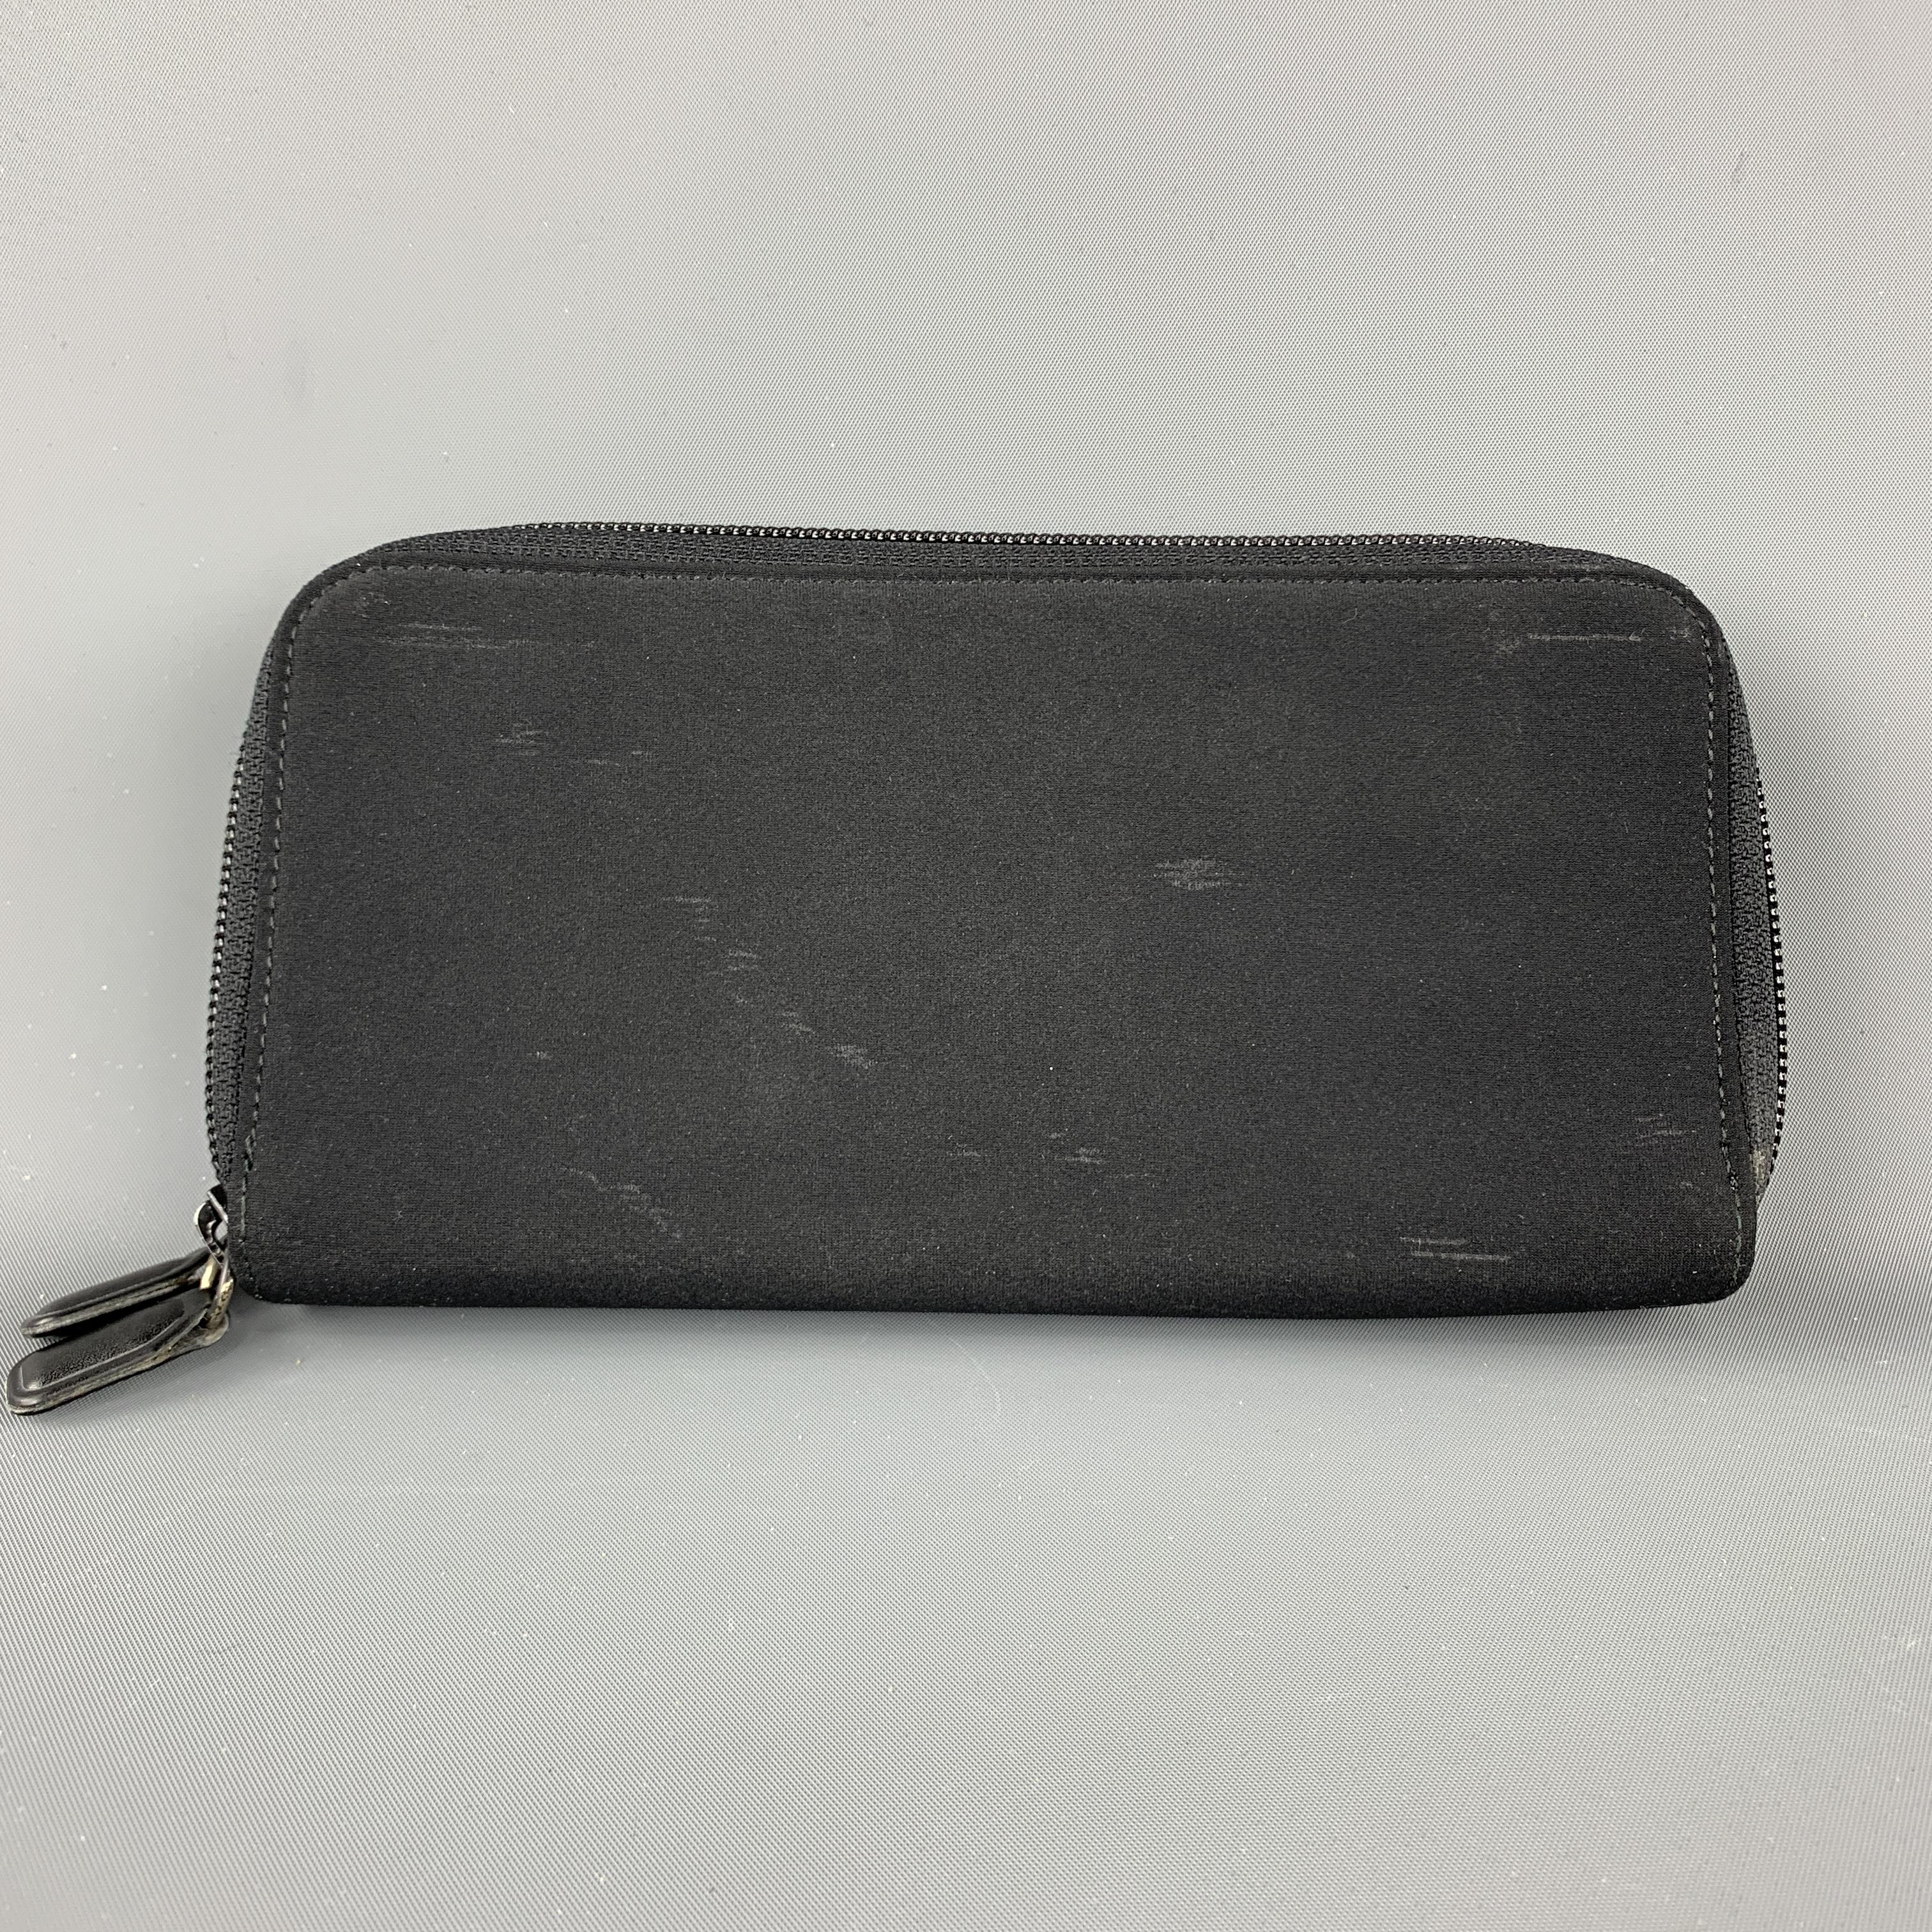 JIL SANDER Wallet / Purse comes in a black tone in a solid canvas material, with internal leather, card slots, dollar bill compartments and a double zipper. Minor wear at canvas. Made in Germany.
 
Good Pre-Owned Condition.
 
Measurements:
 
Length: